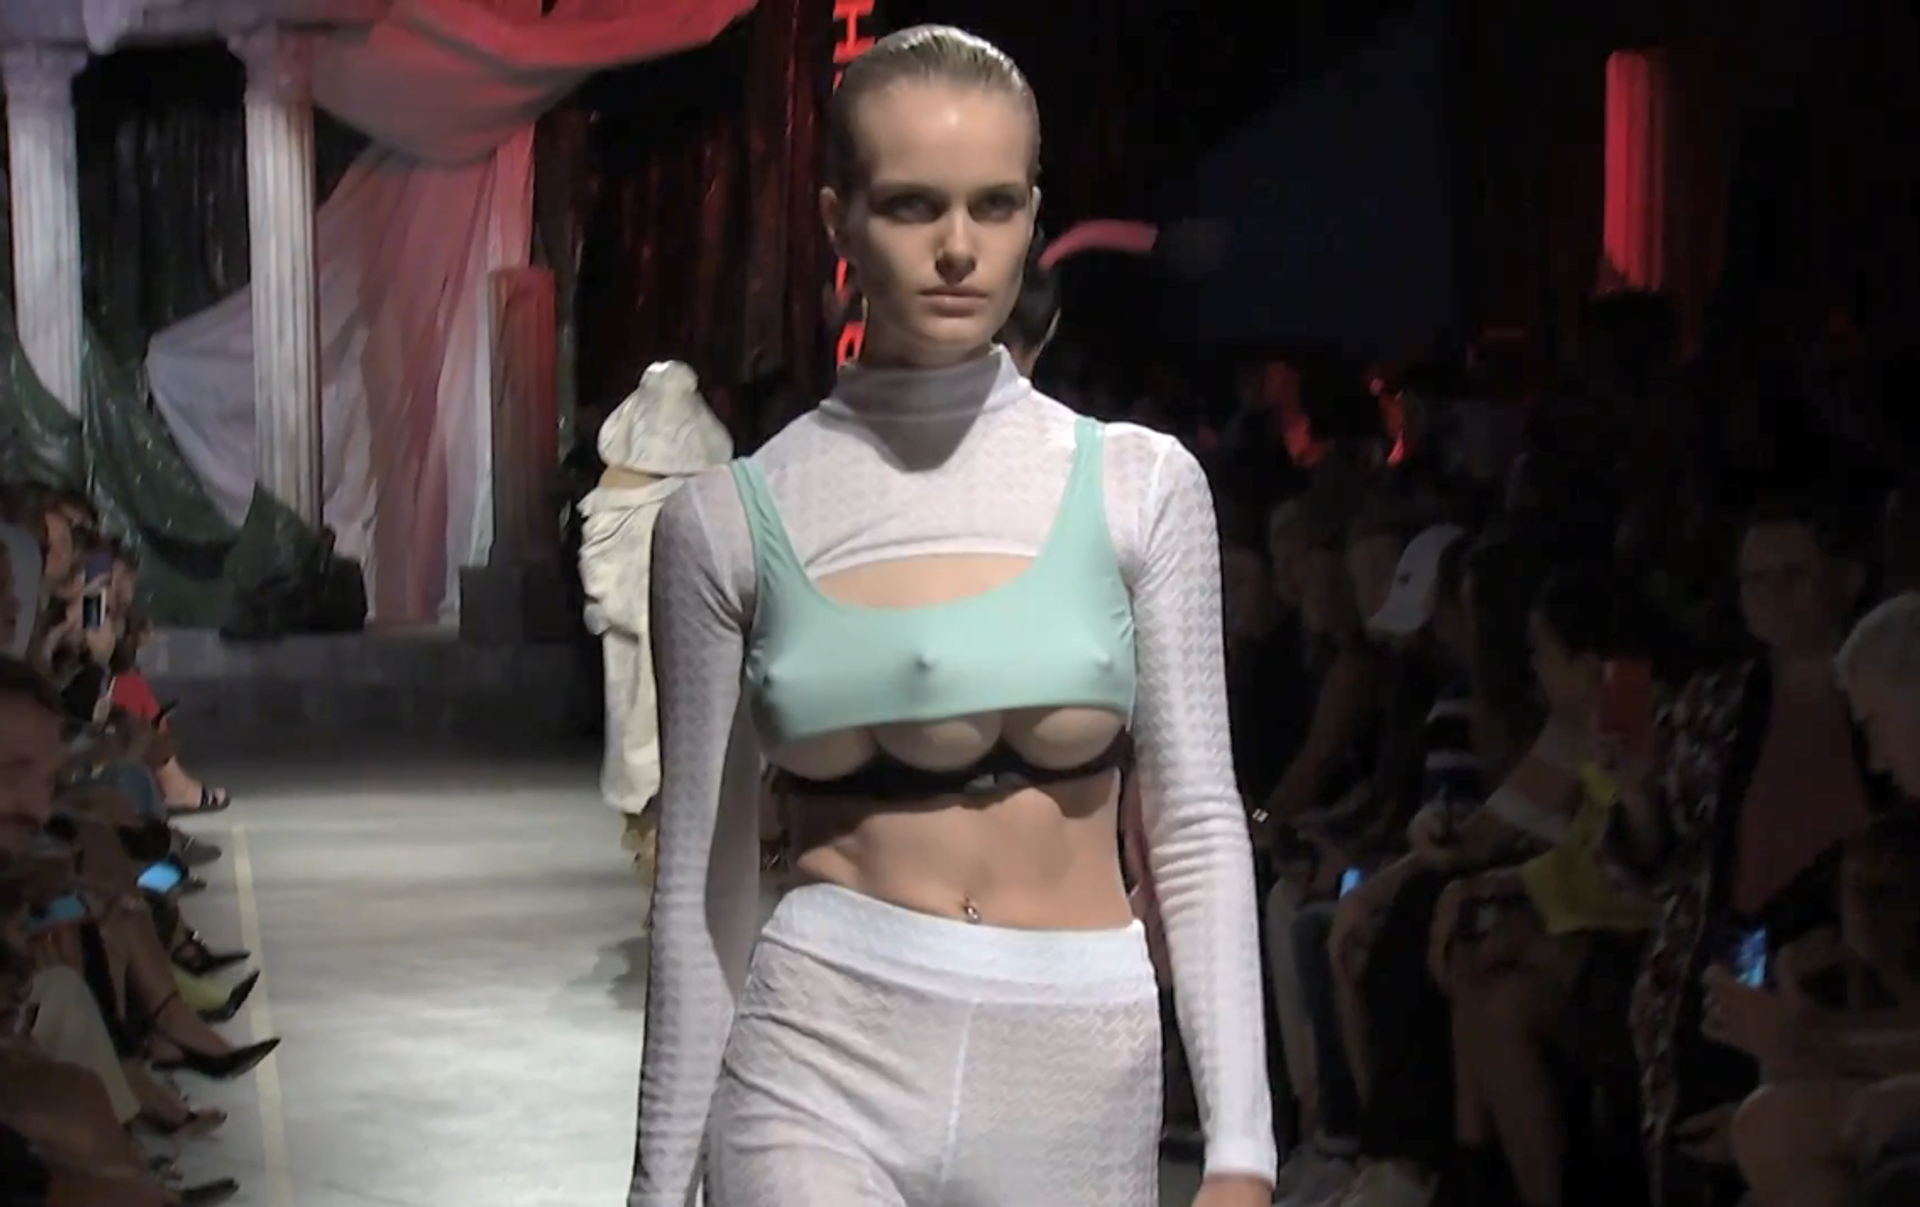 A catwalk at Milan Fashion Week has featured models with three breasts.